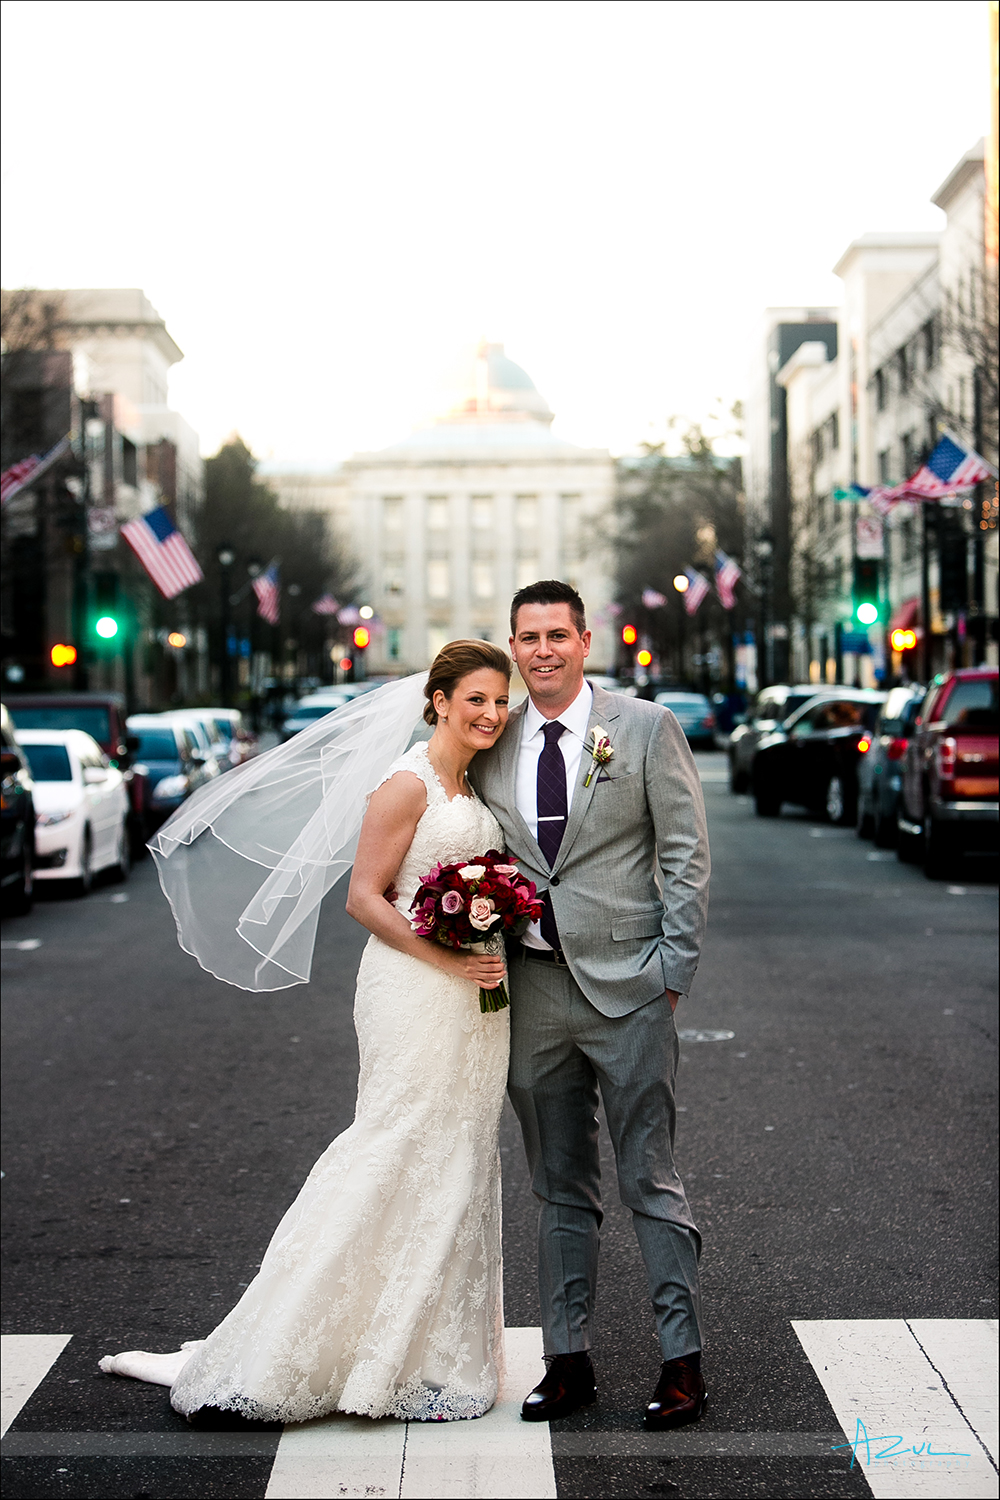 Wedding day B&G portrait photography on Fayetteville St in Raleigh, NC